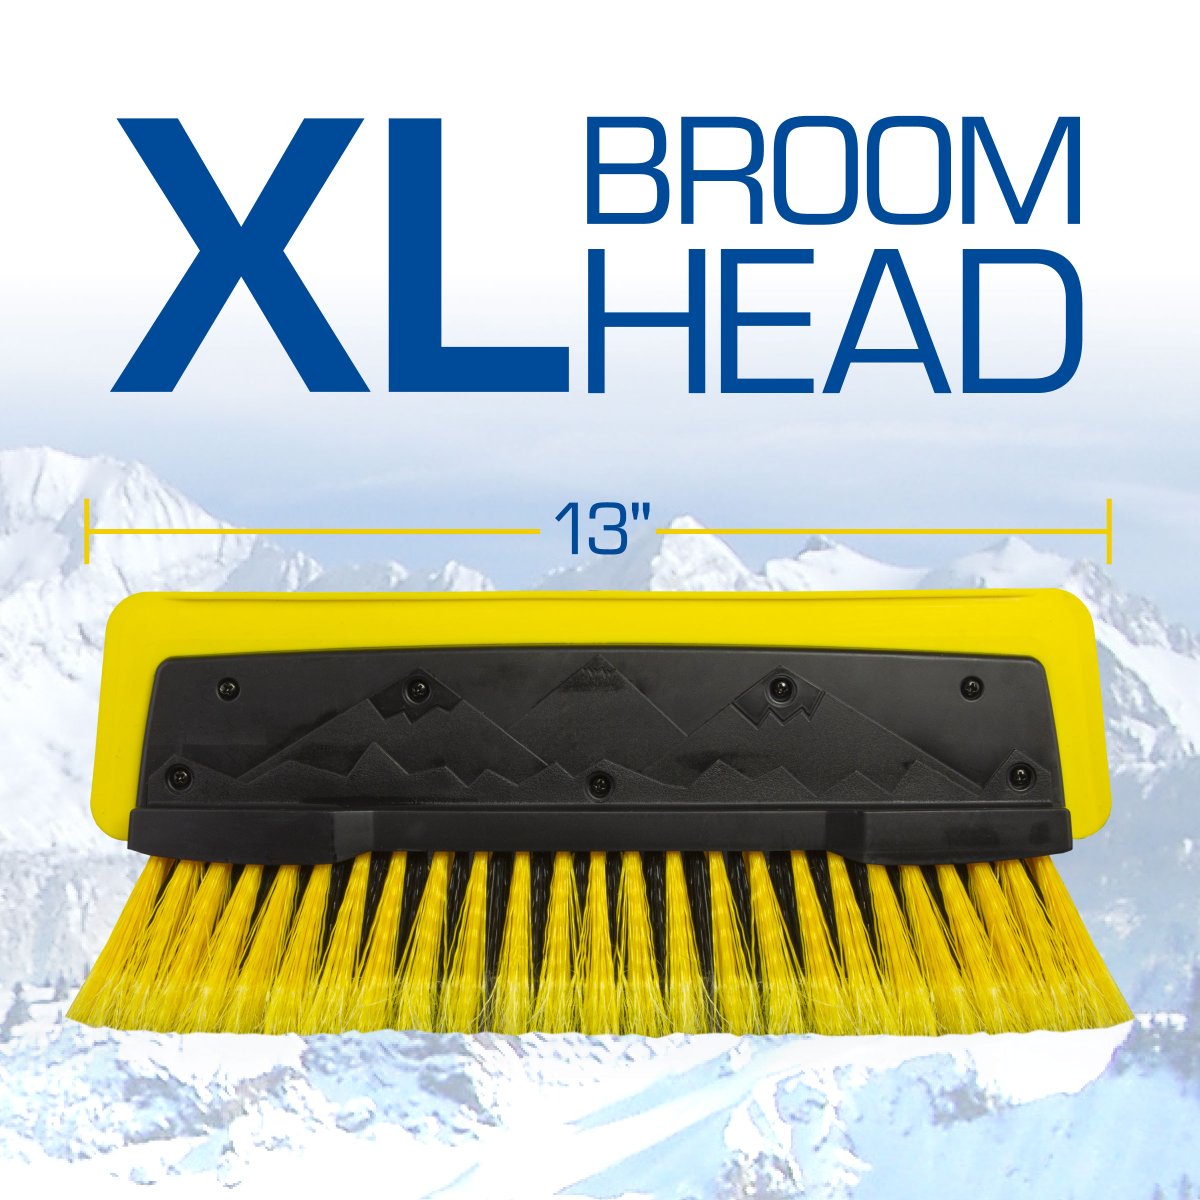 The snow & ice may be tough but our 61” Snowbroom is tougher! Get yours today at your local Walmart or visit Walmart.com: bit.ly/3W28jLE #RainX #snowbroom #snowbrush #winterready #OutsmartTheElements